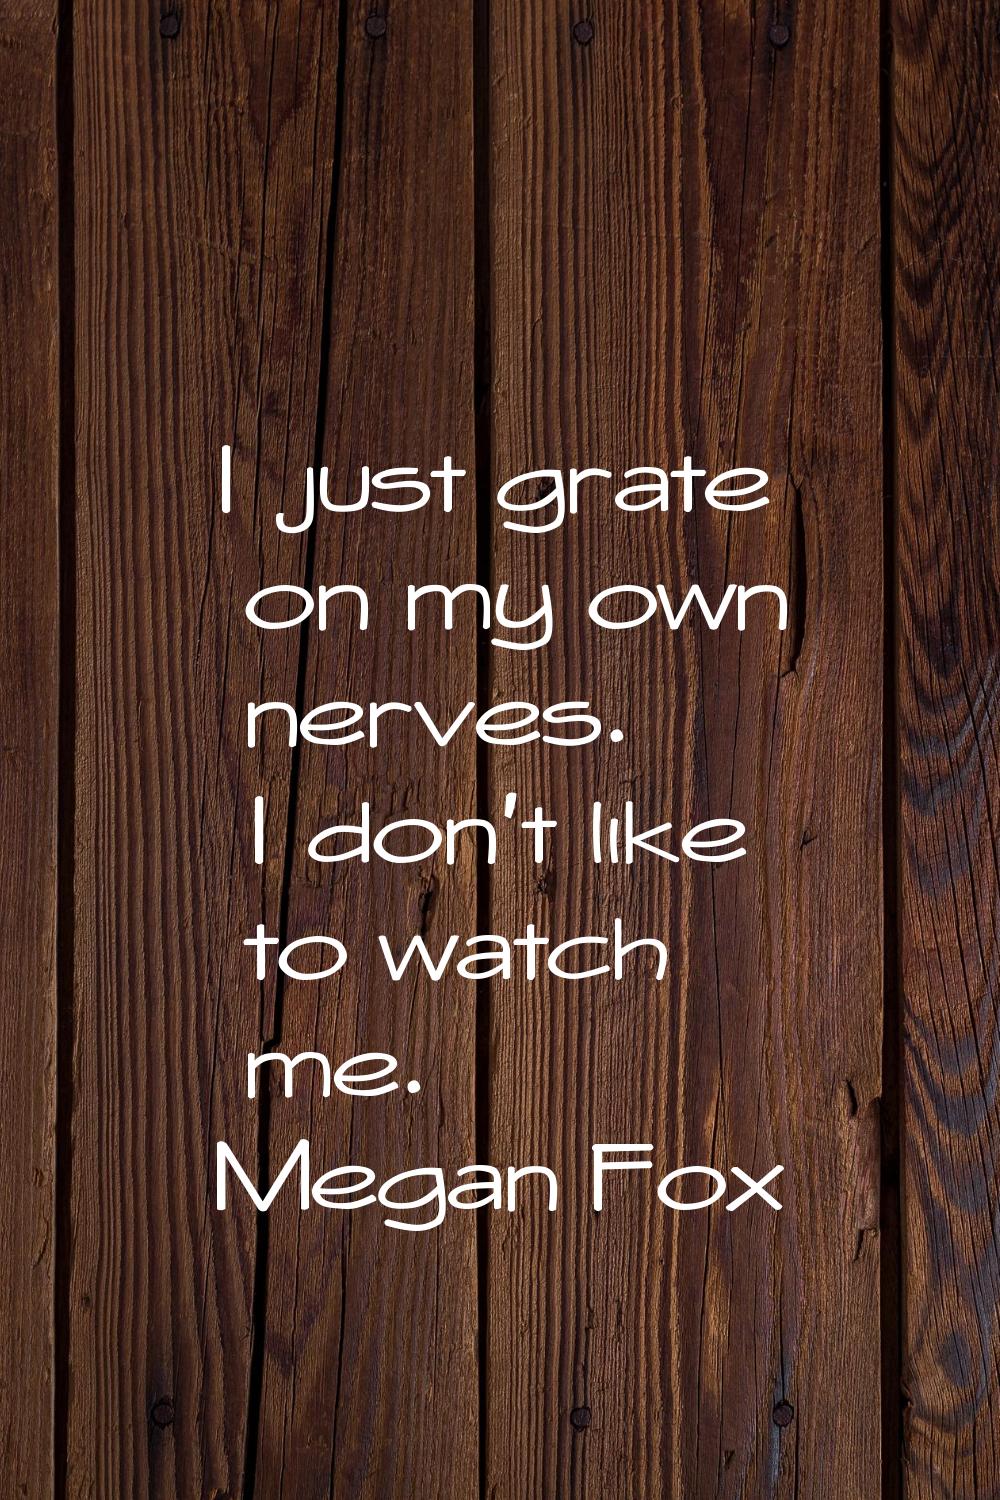 I just grate on my own nerves. I don't like to watch me.